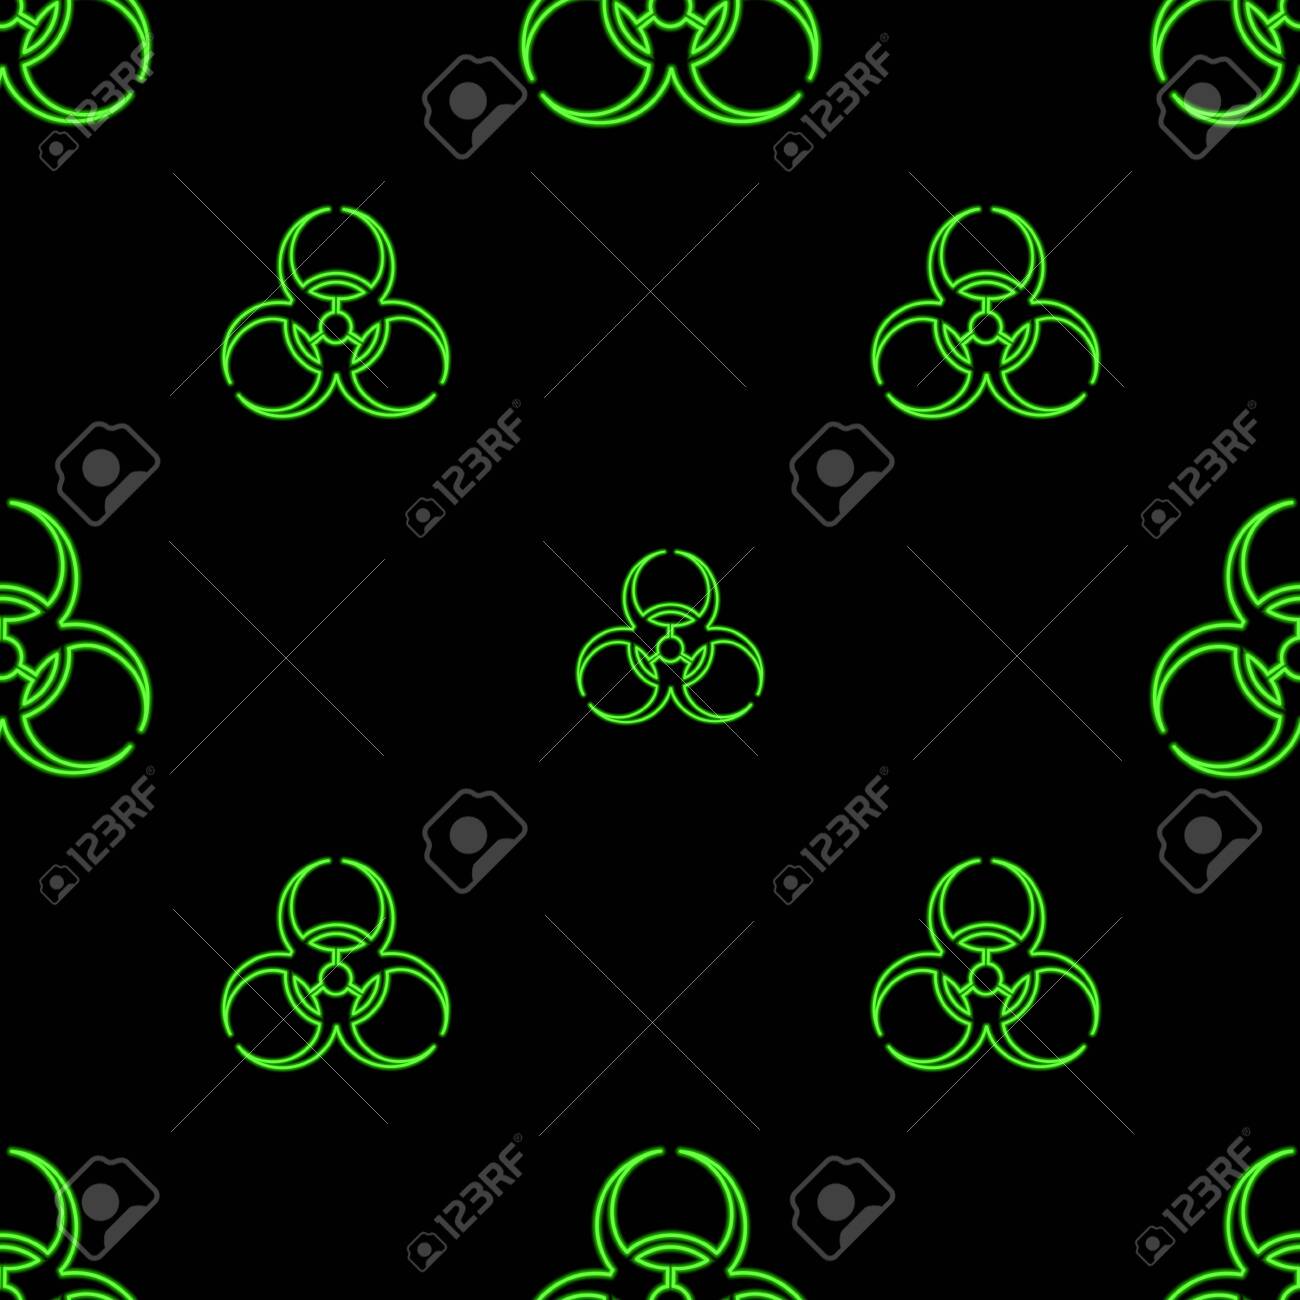 The Biohazard Sign Is Green Neon Lights Endless Pattern Vector